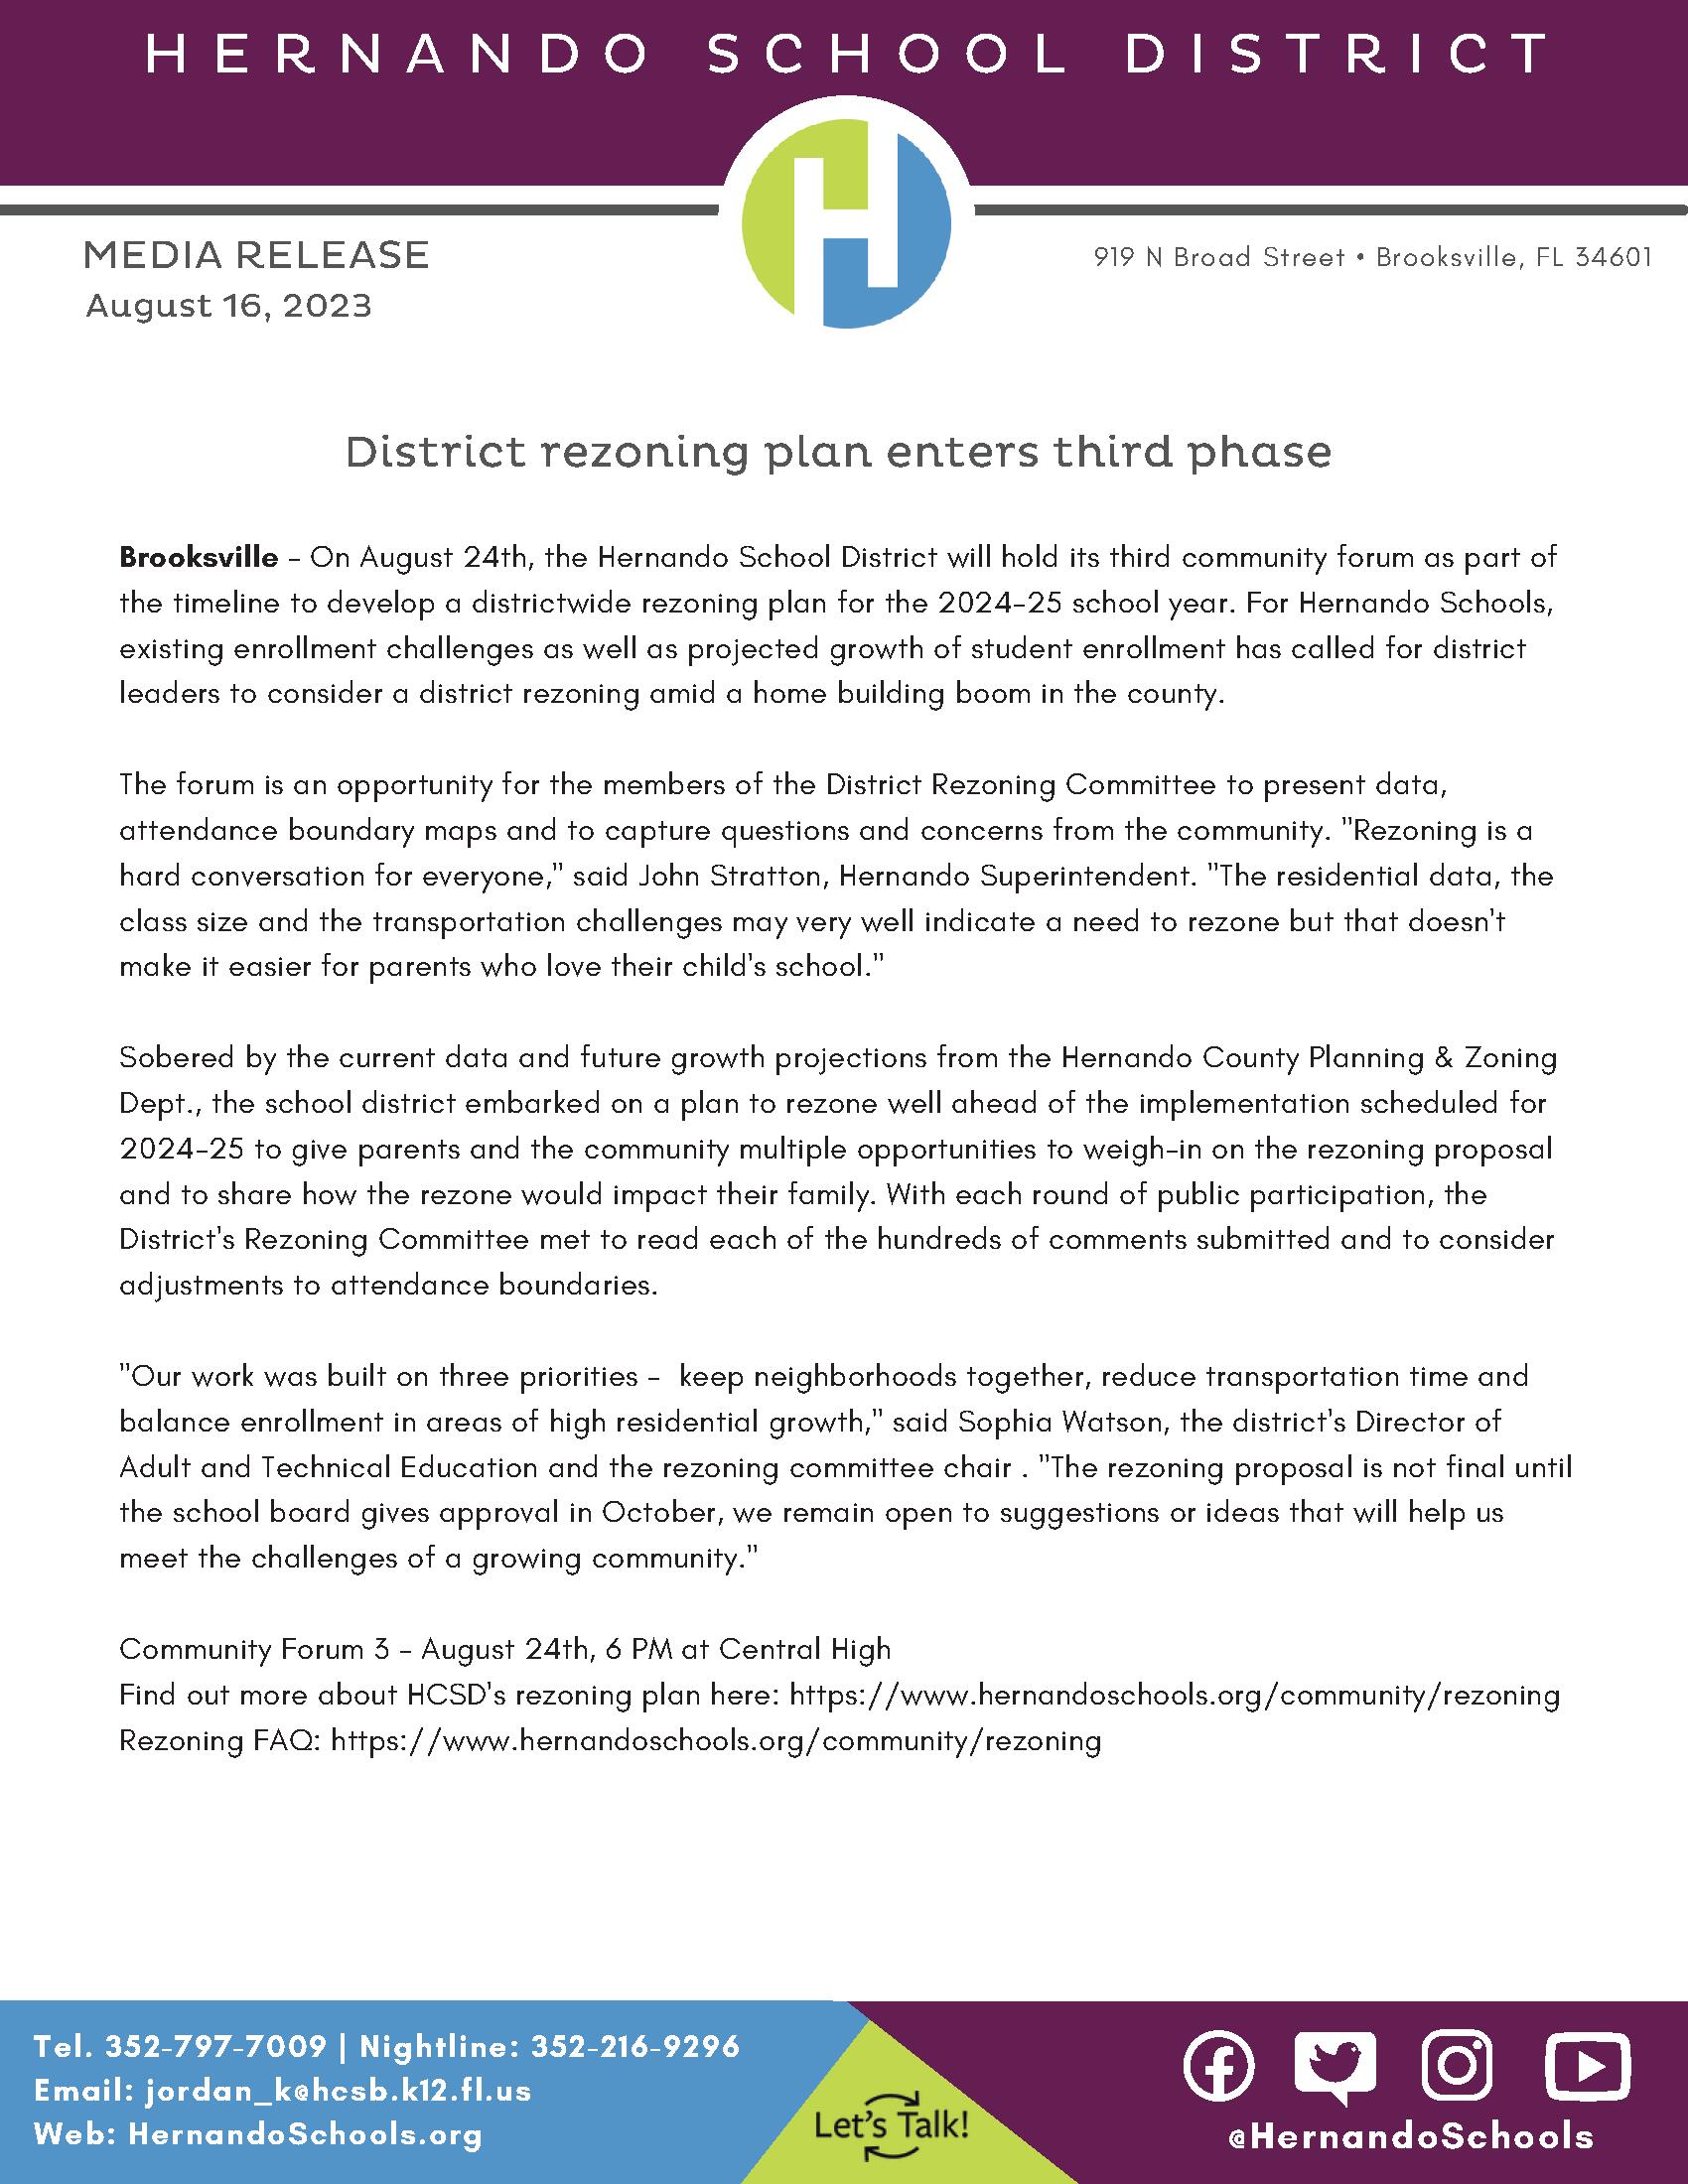 Media Release - District rezoning plan enters third phase